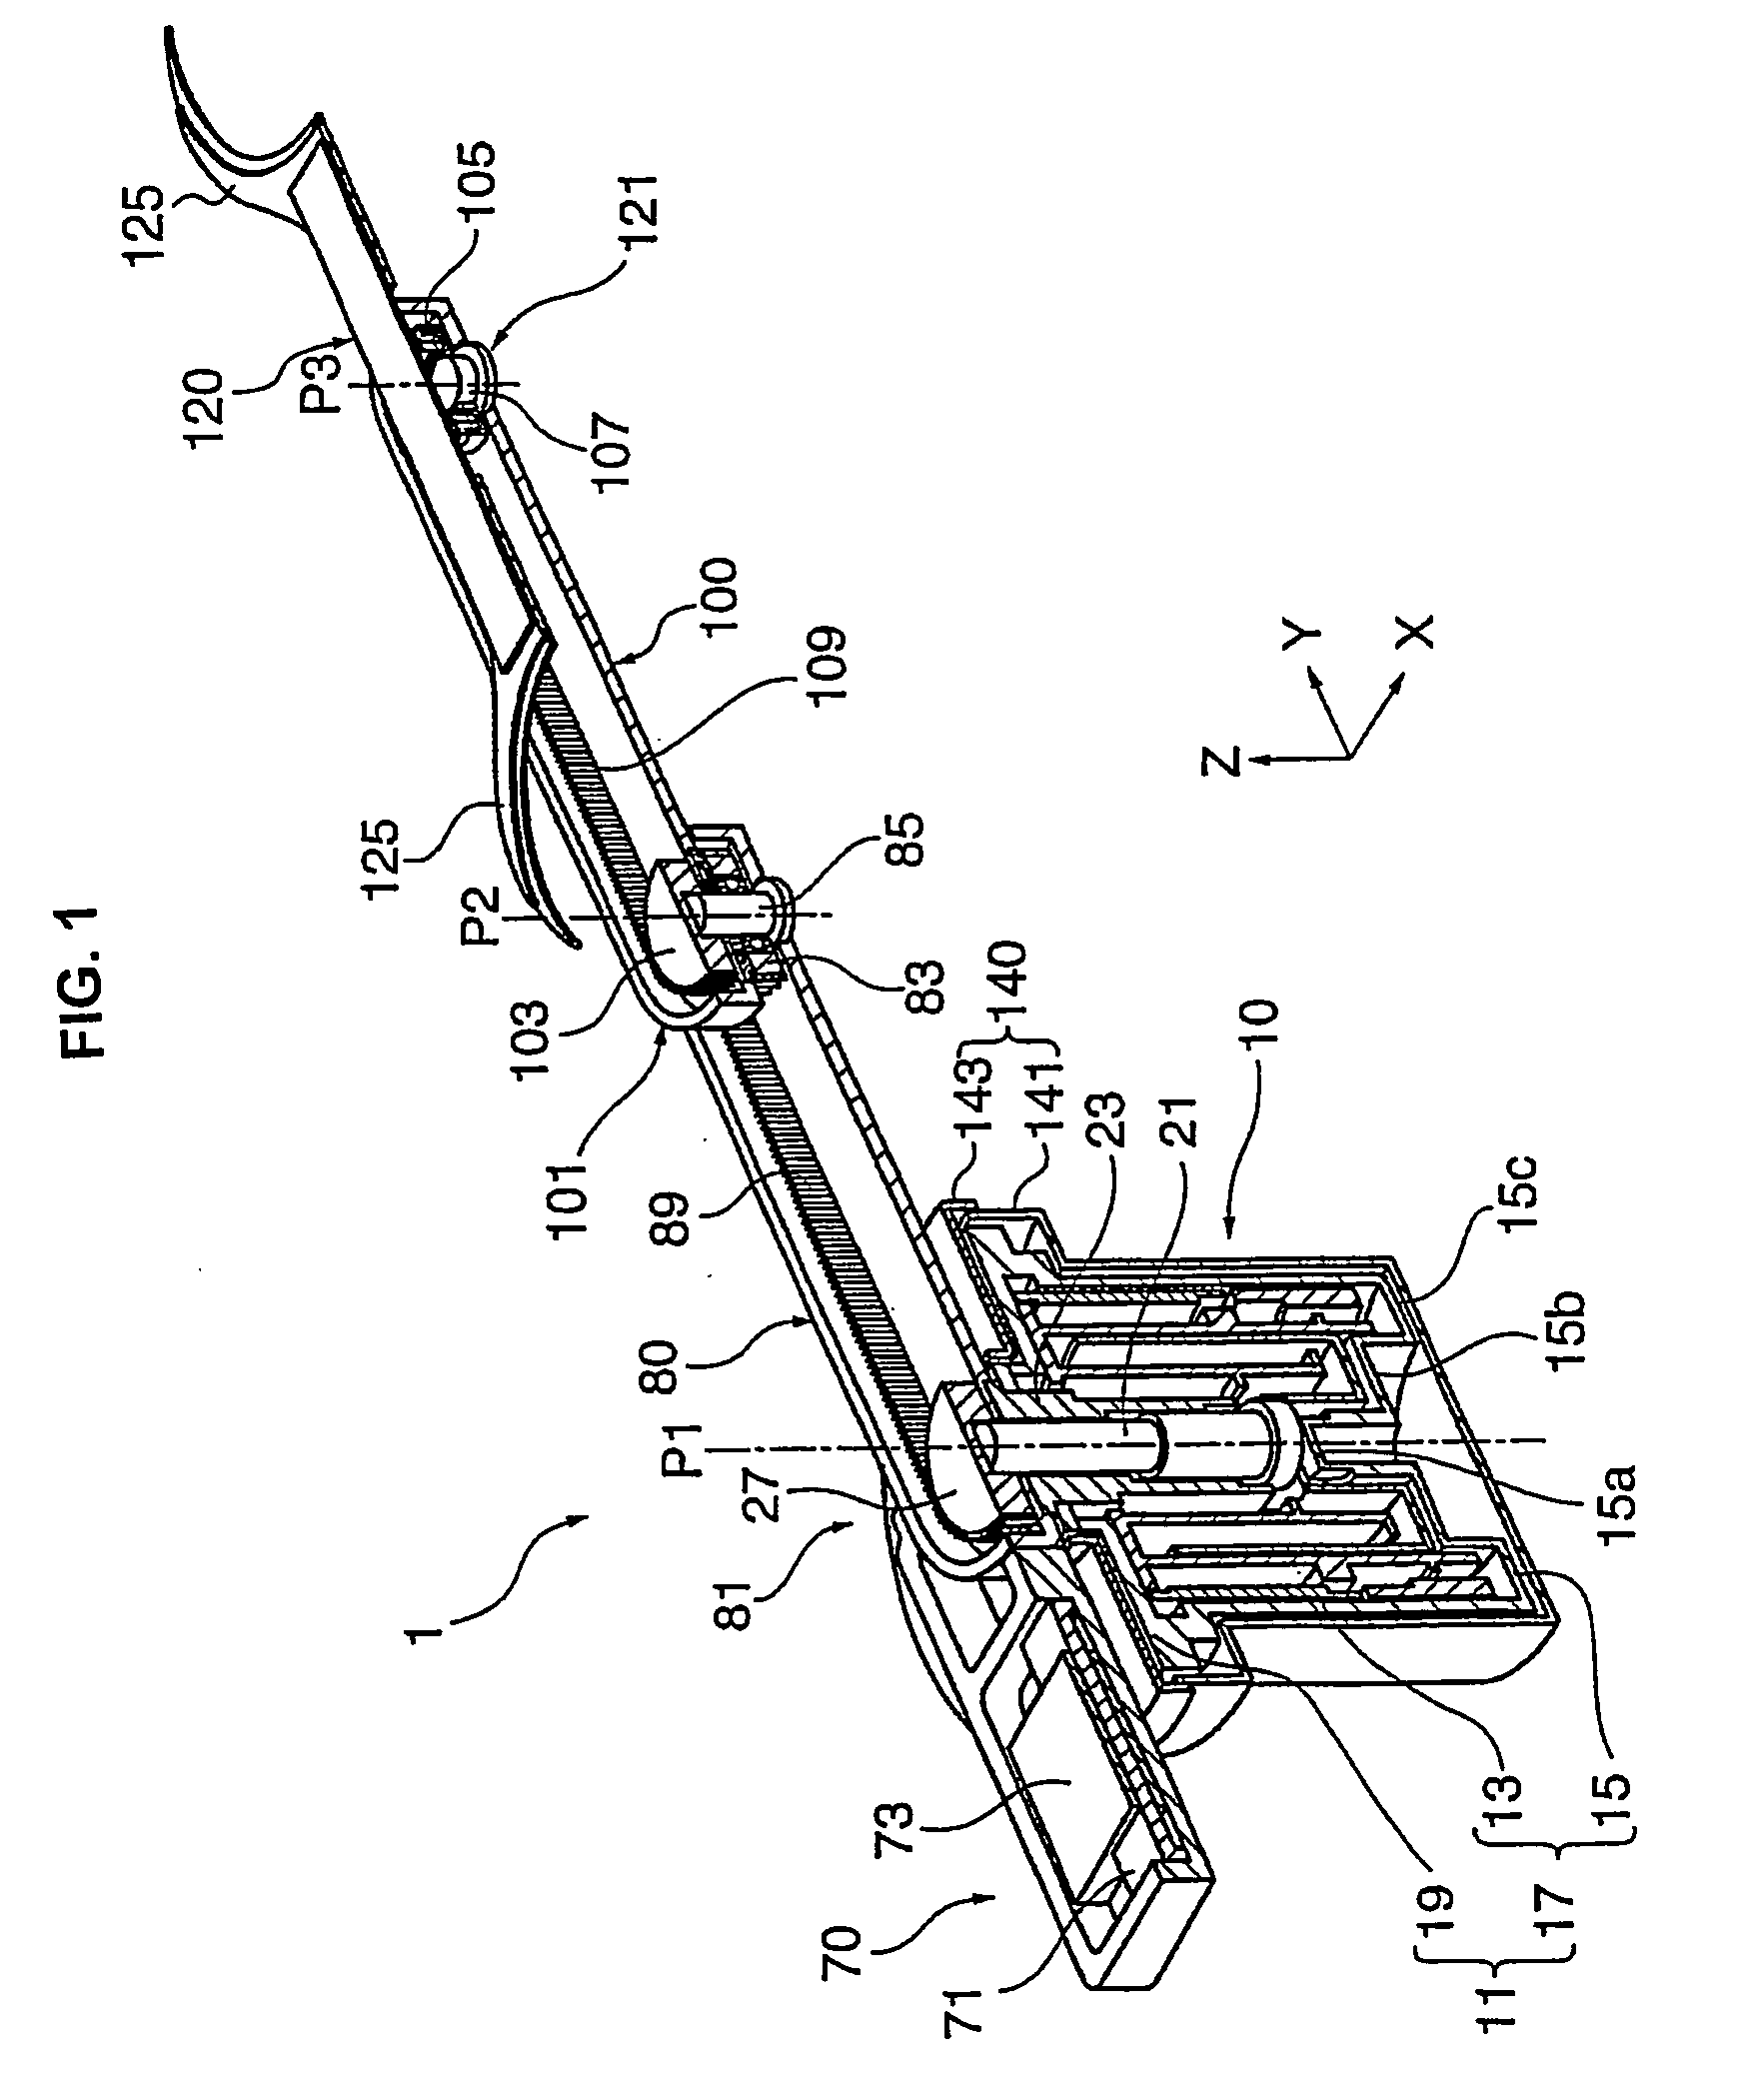 Motor, robot, substrate loader, and exposure apparatus